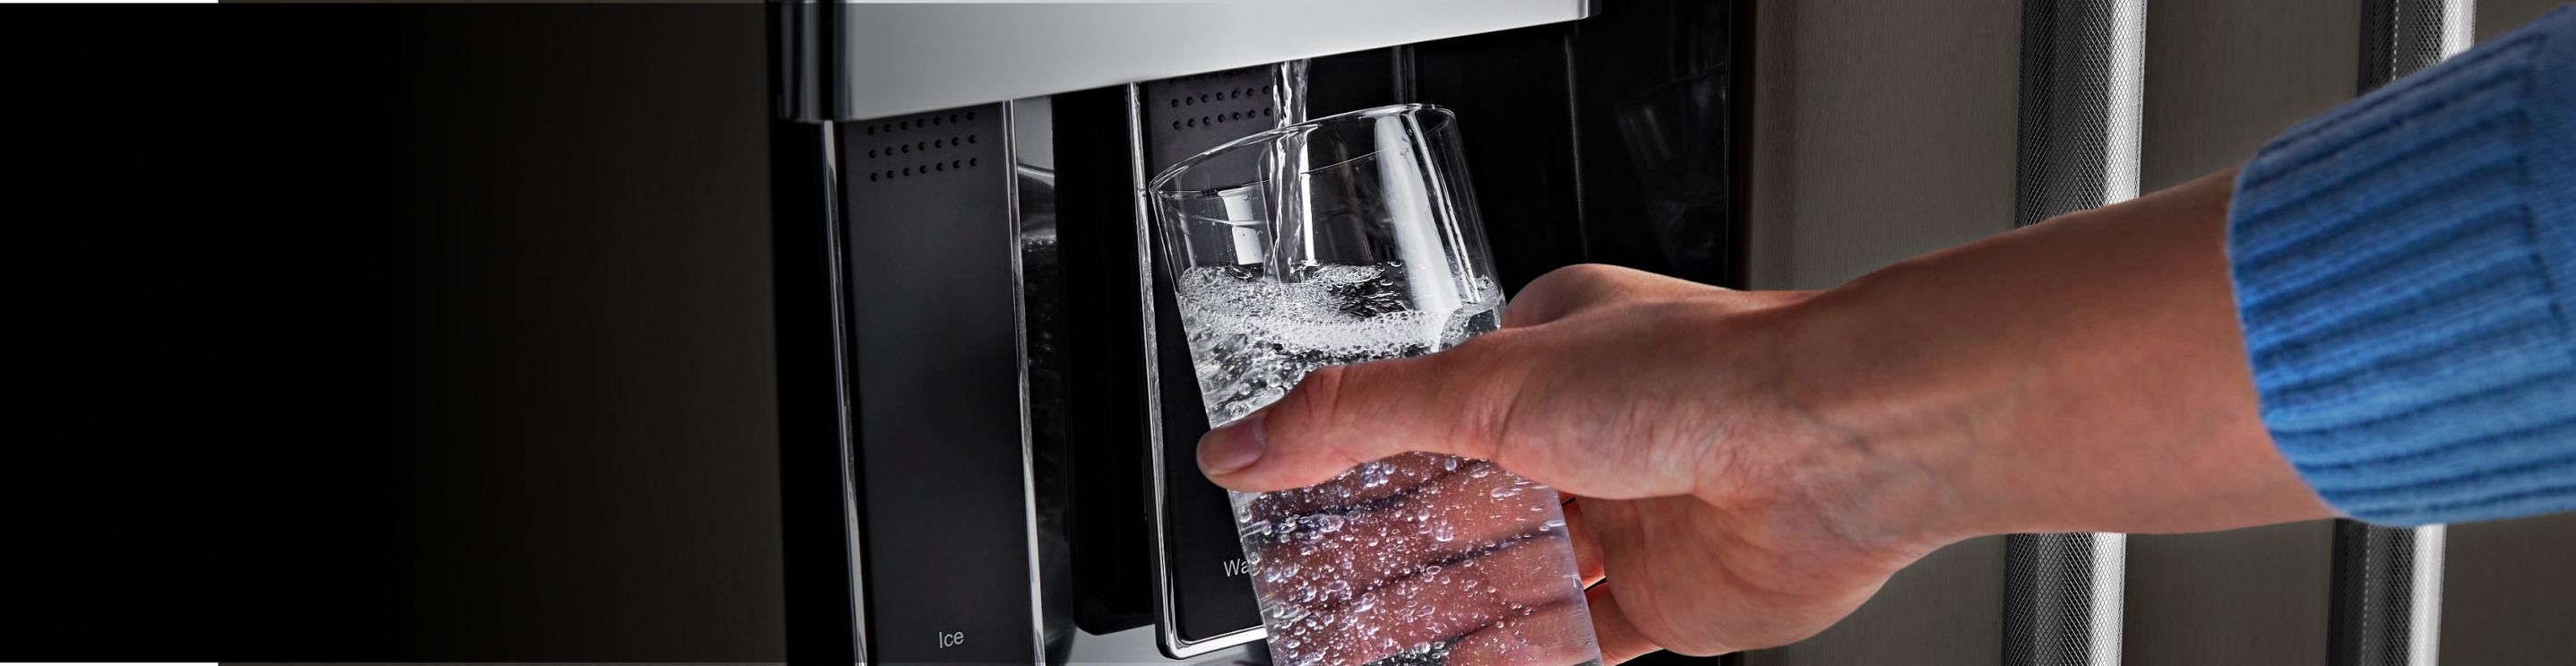 Filling a glass from a KitchenAid® refrigerator water dispenser.